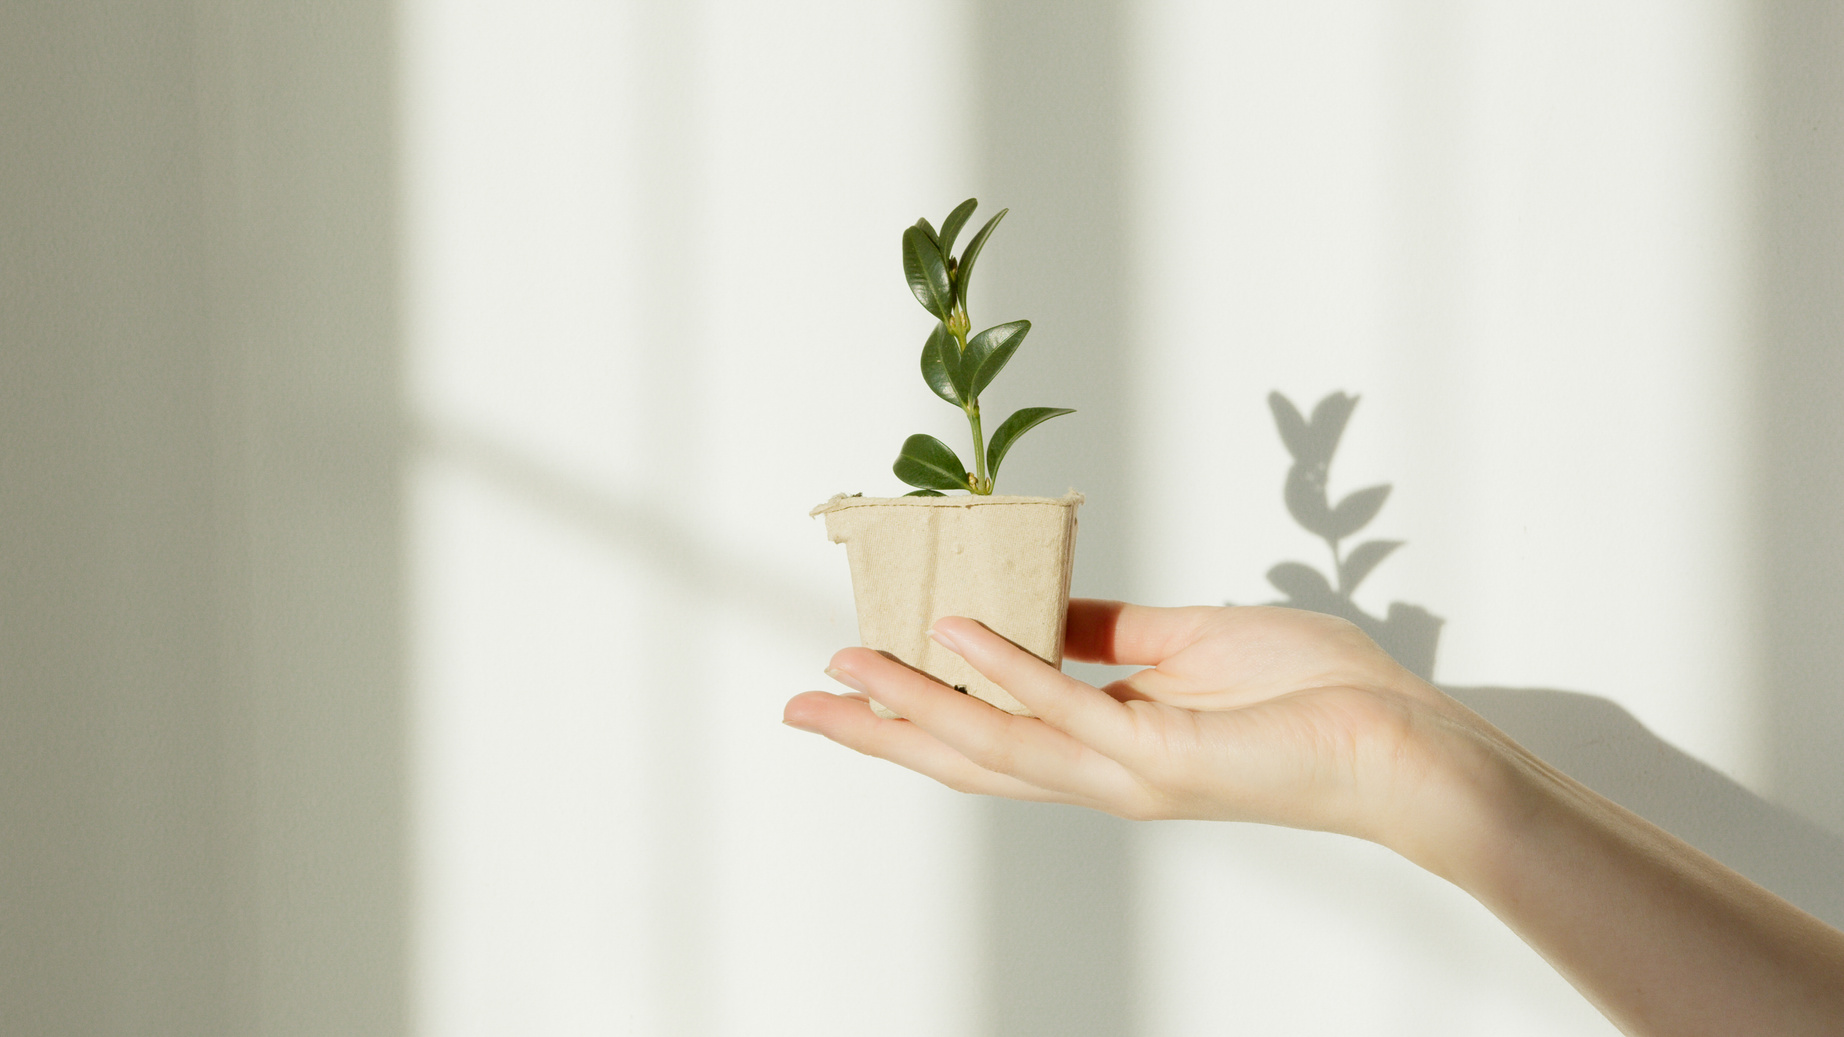 Person Holding Green Plant in Brown Pot